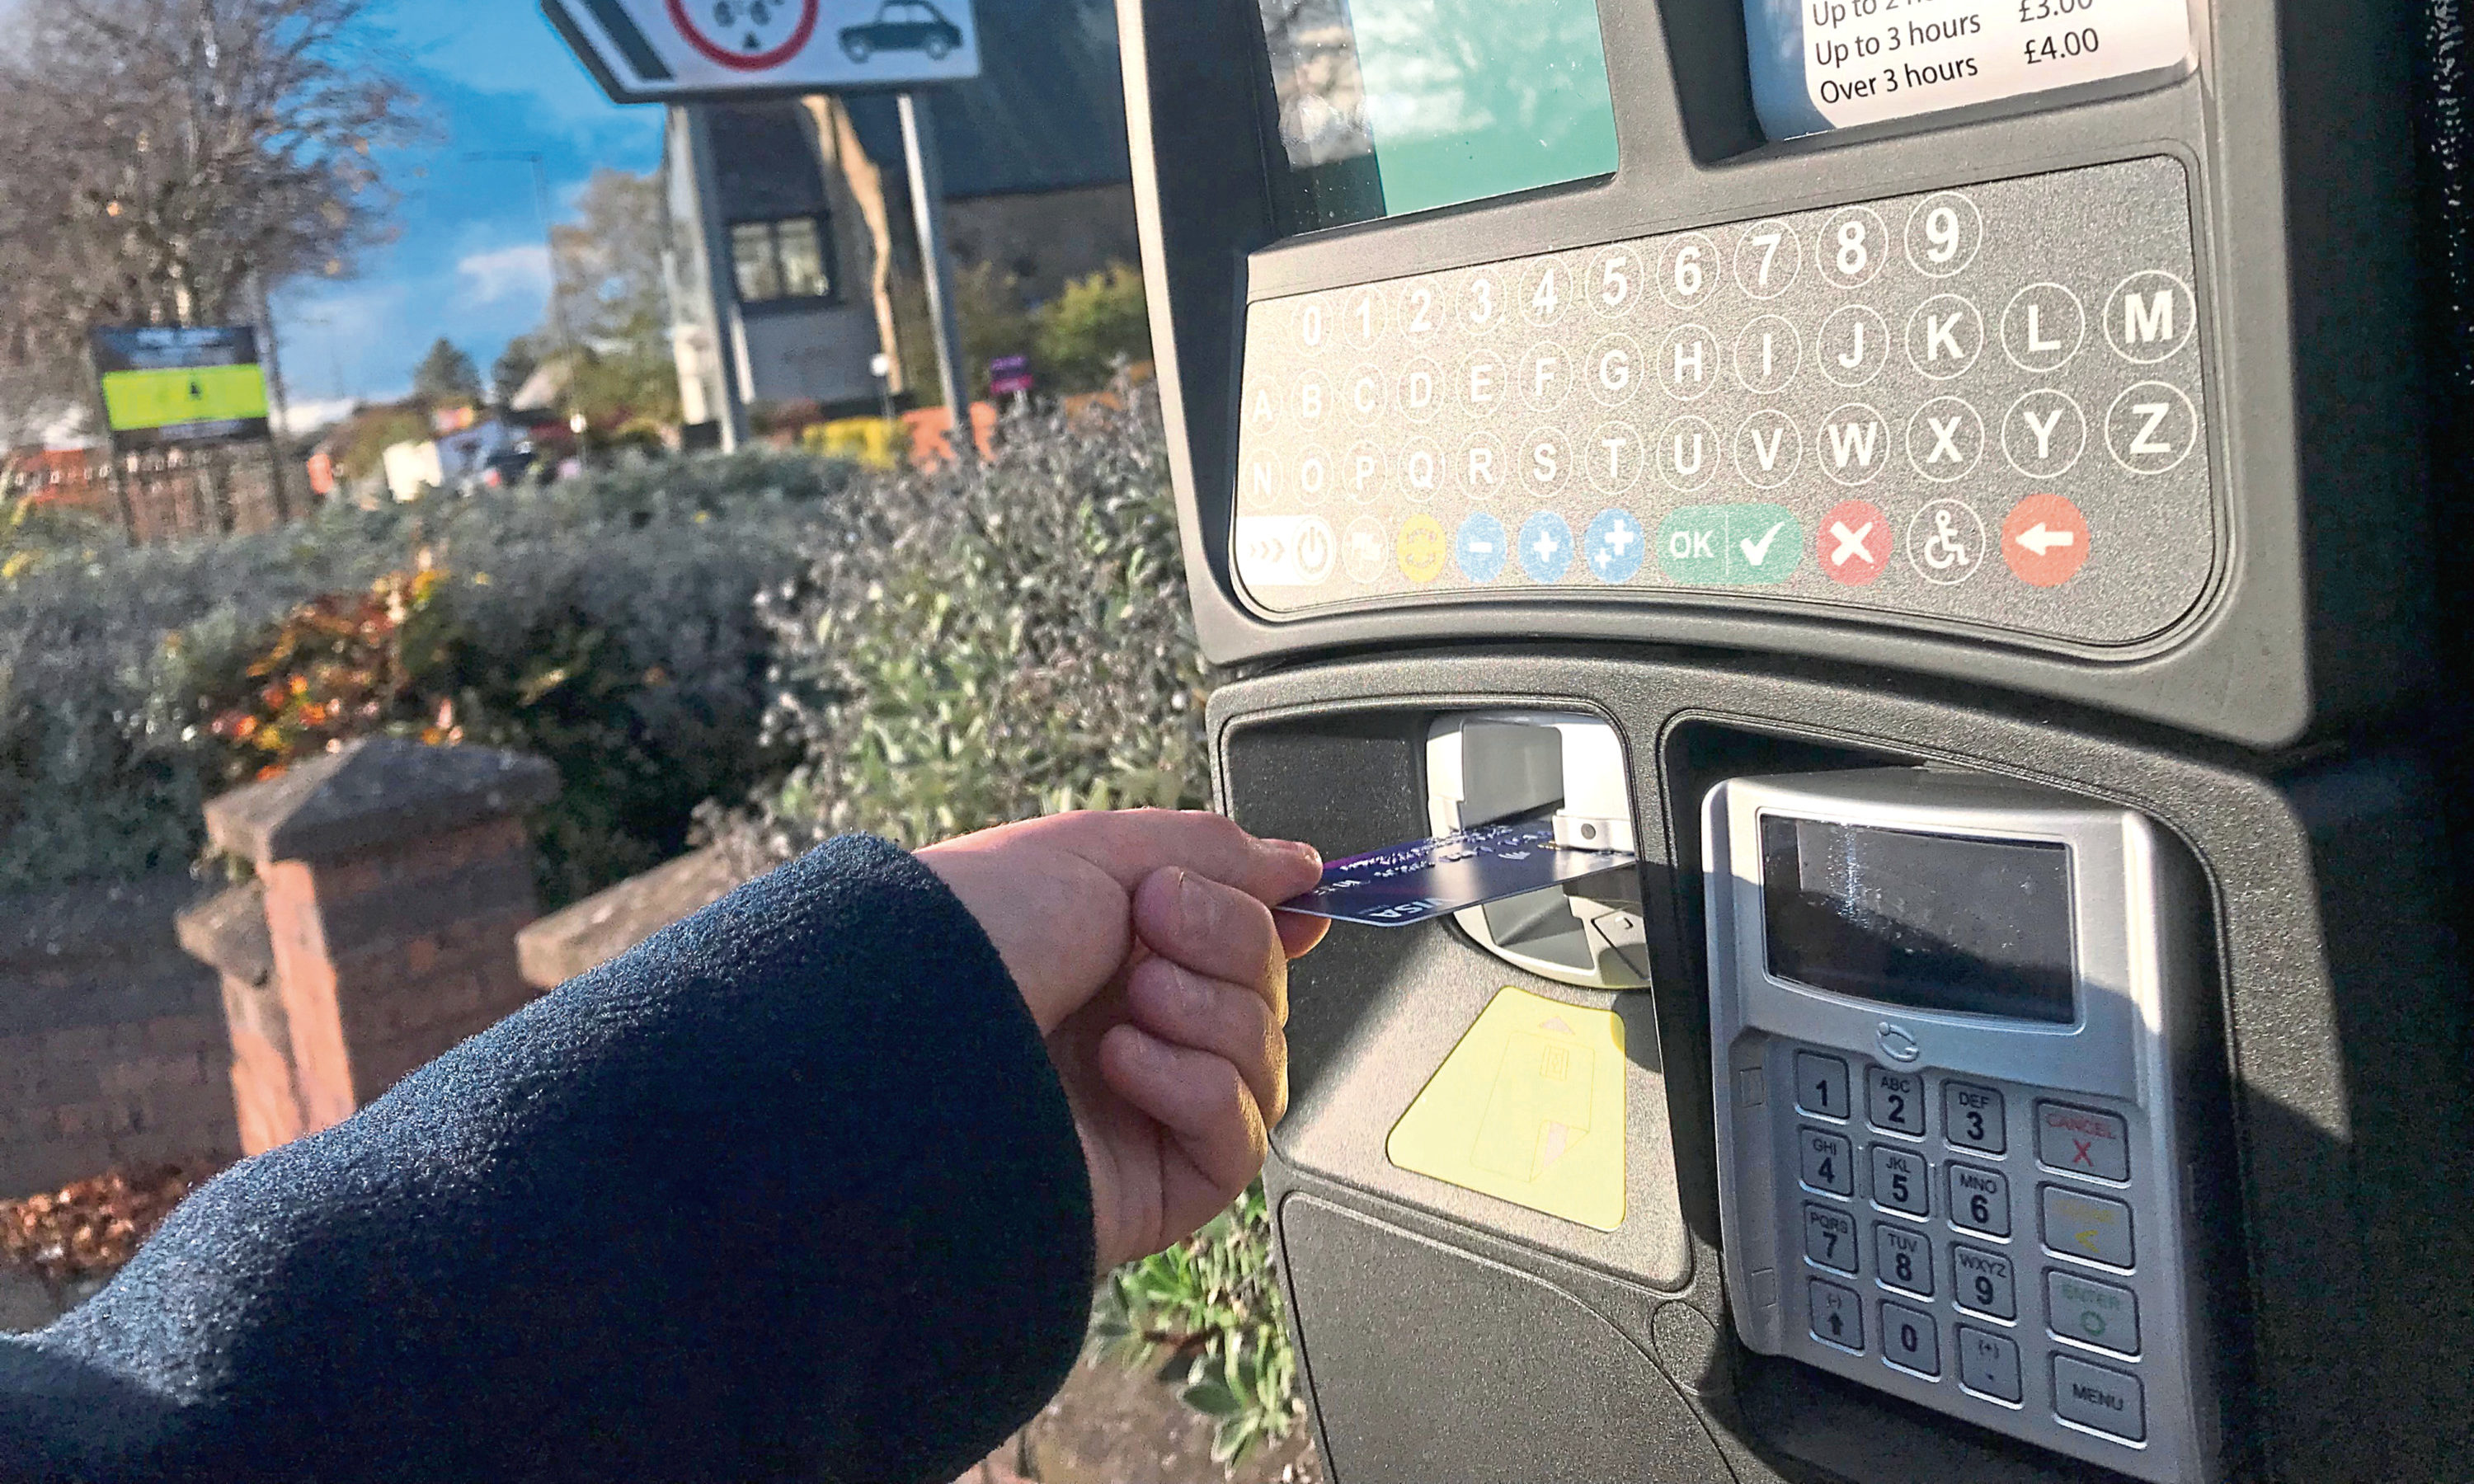 A cash payment option is to be installed at some of the Angus meters.